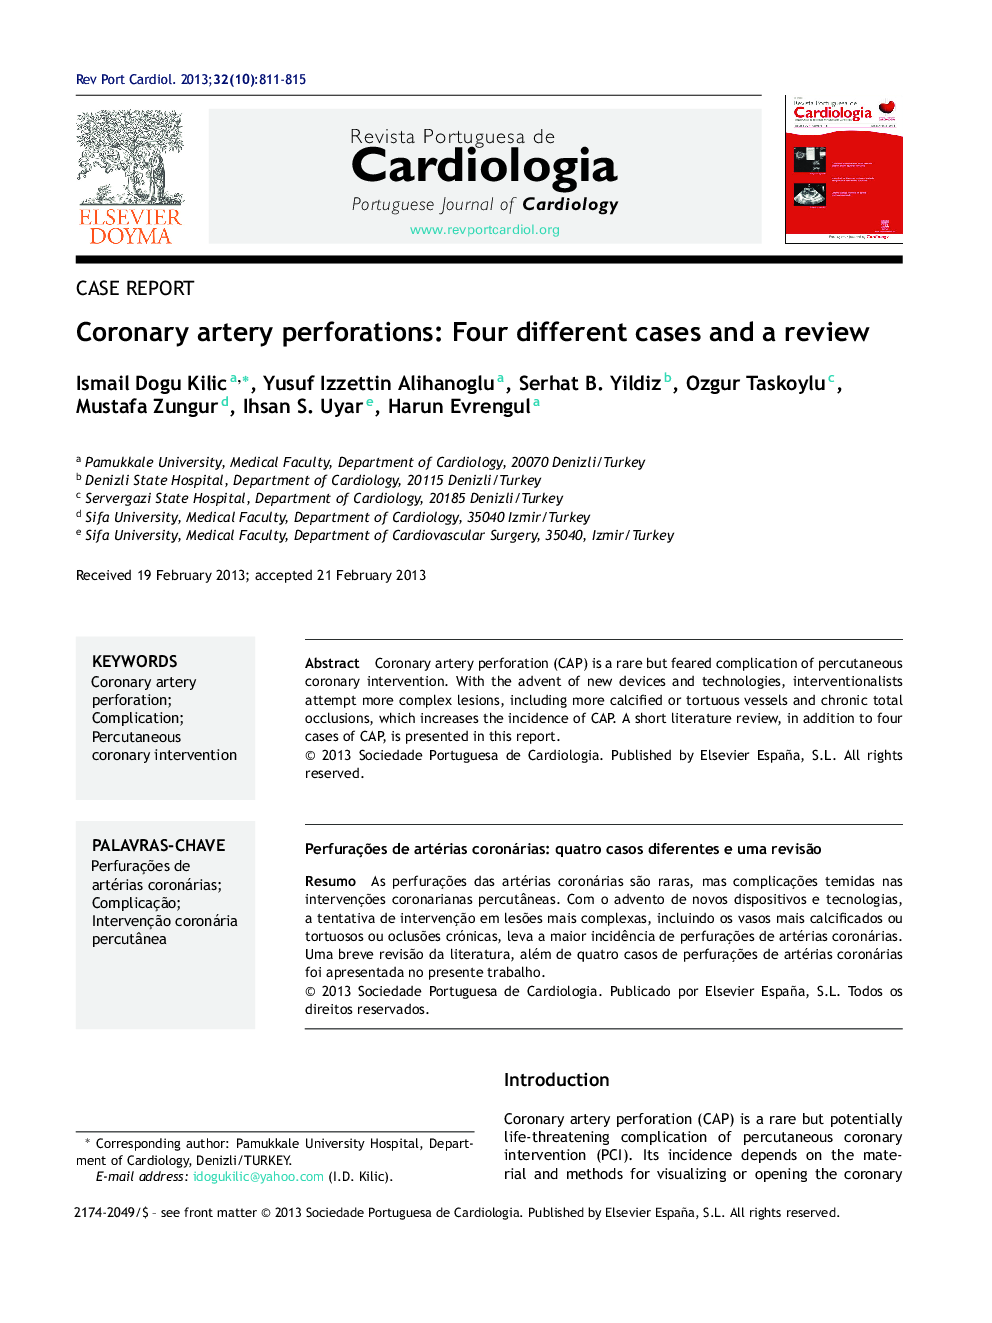 Coronary artery perforations: Four different cases and a review